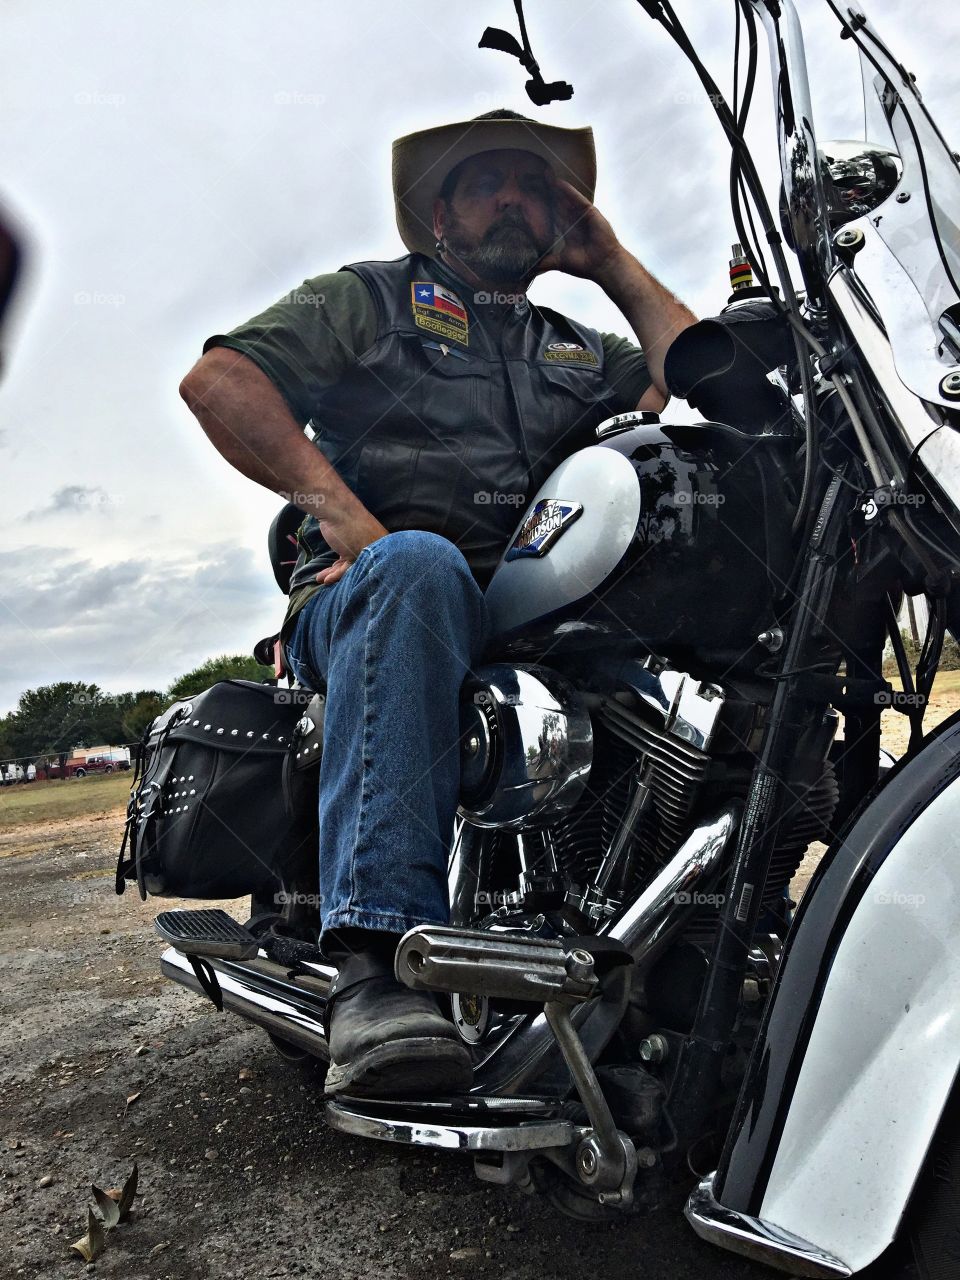 Thinking about the ride. I combat veteran club member thinking about his next ride.